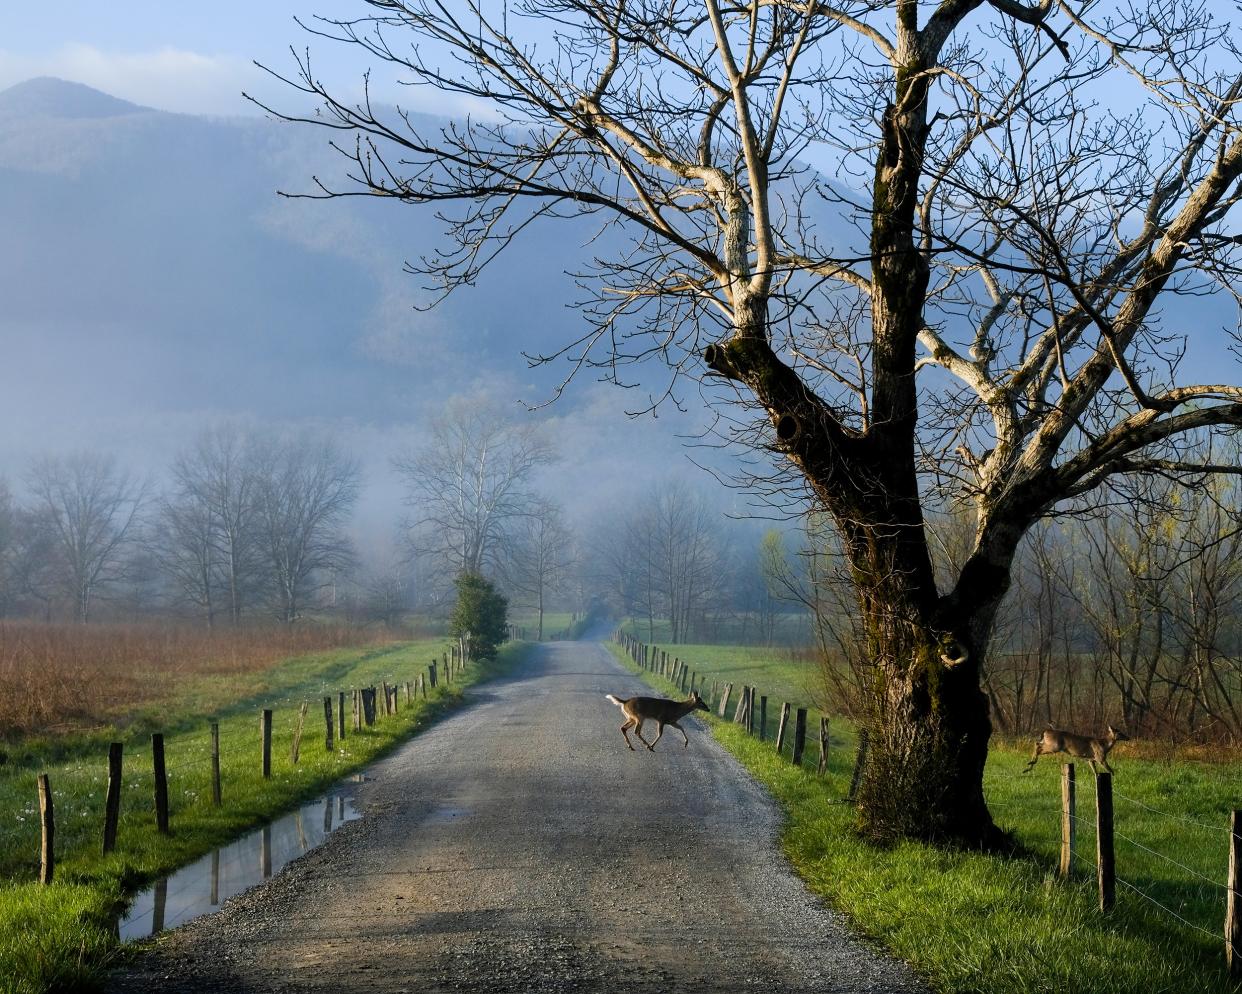 Cades Cove in Great Smoky Mountains National Park, Tennessee